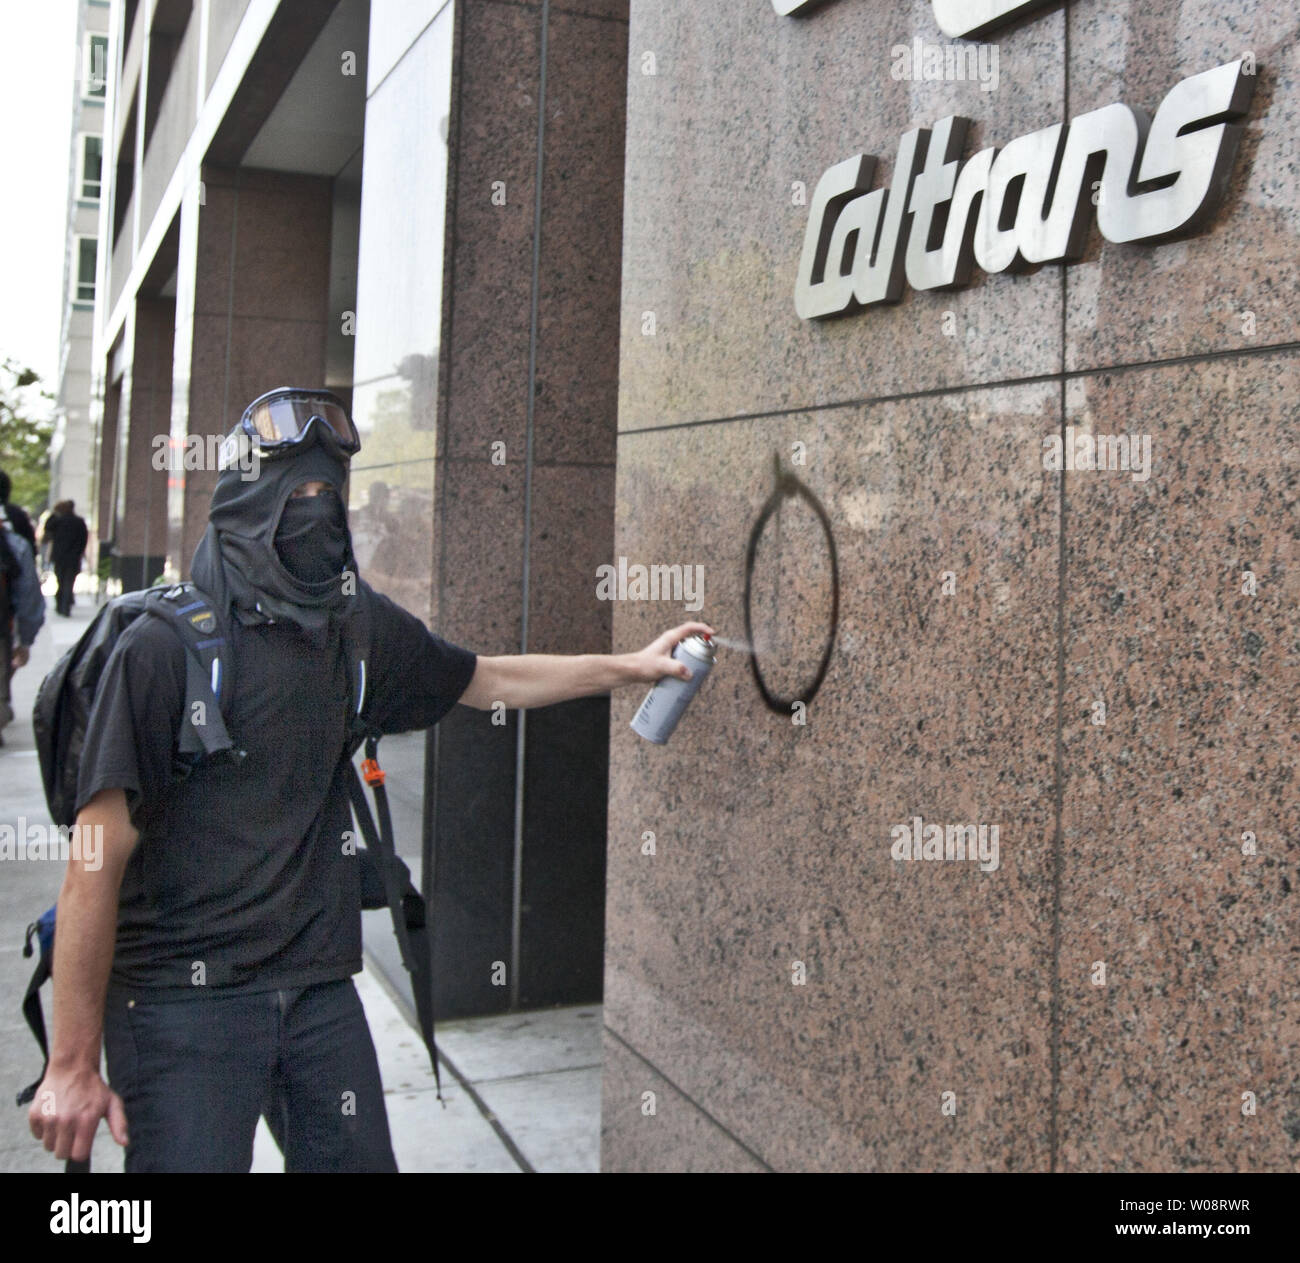 A vandal spray paints the Caltrans building during a May Day protest in Oakland, California on May 1, 2012.  Demonstrators closed streets and clashed with police.   UPI/Terry Schmitt Stock Photo